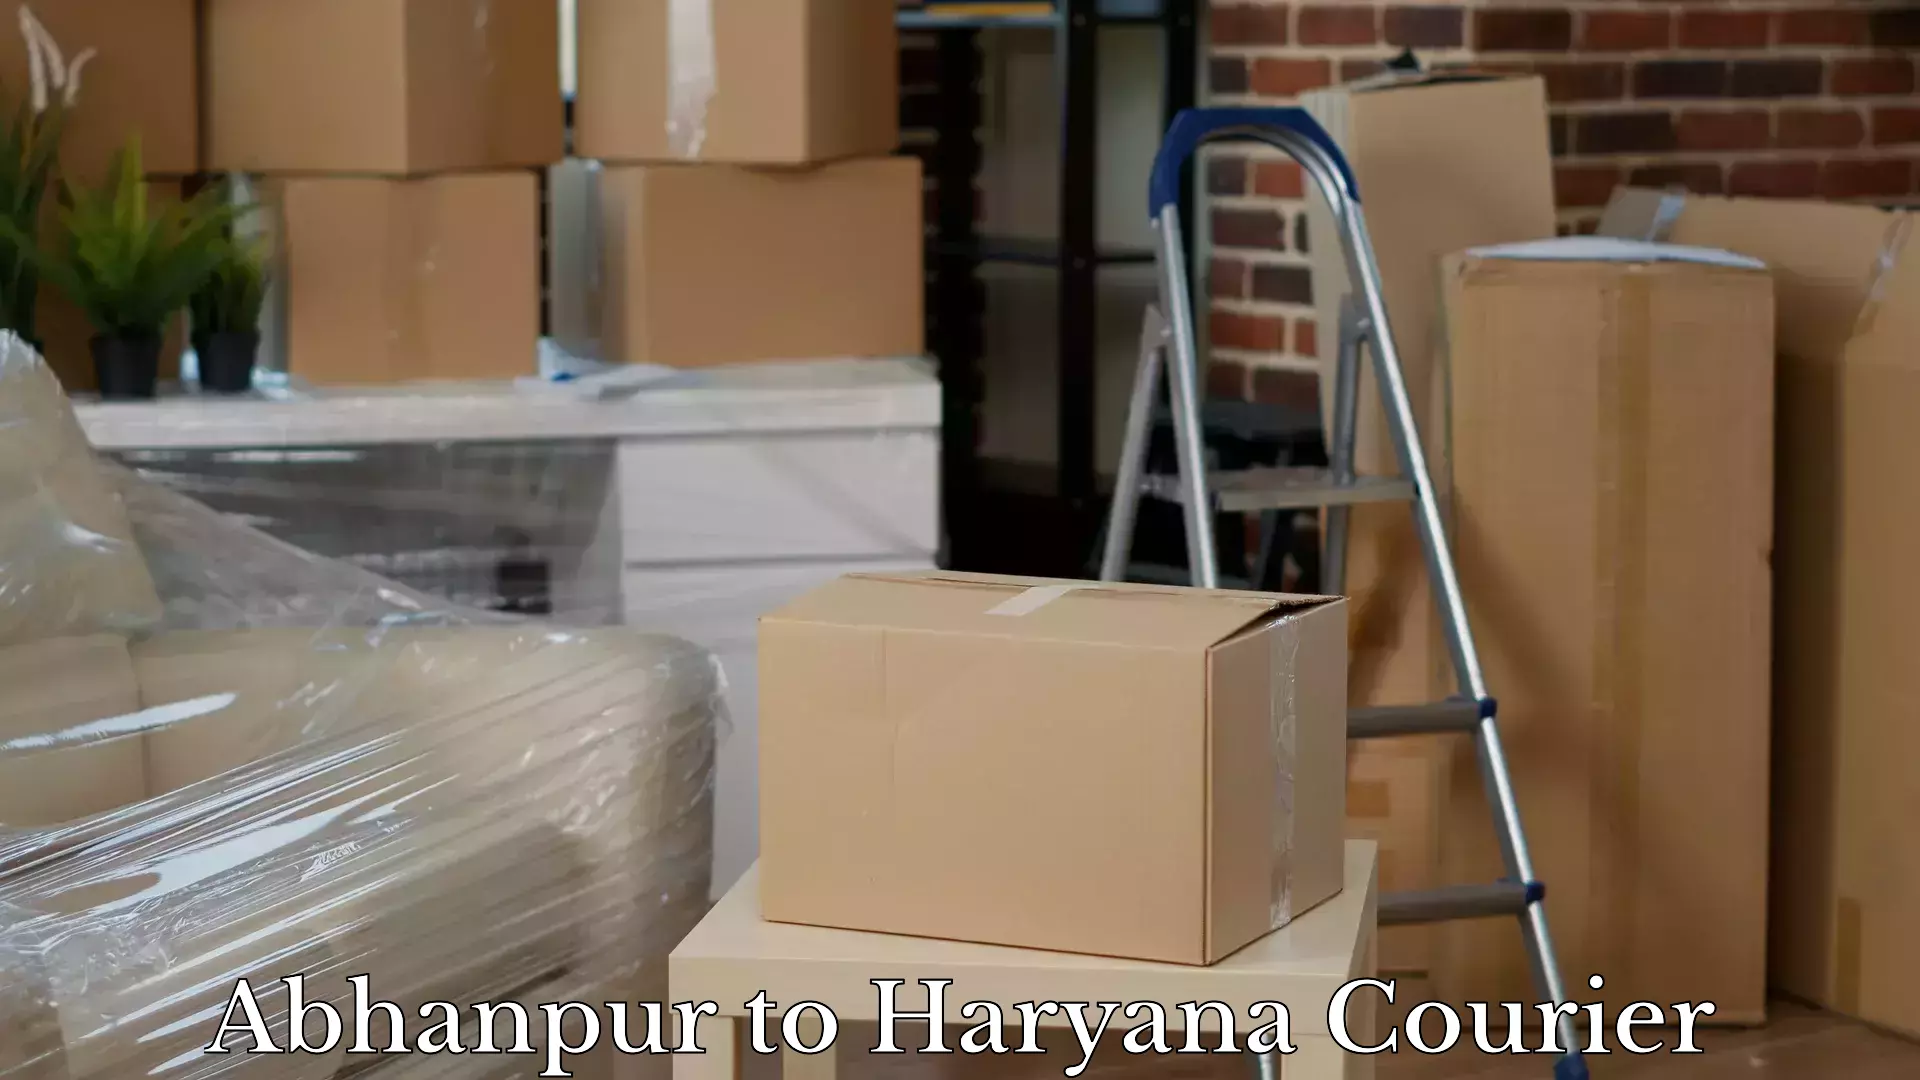 Luggage shipping specialists Abhanpur to Gurgaon